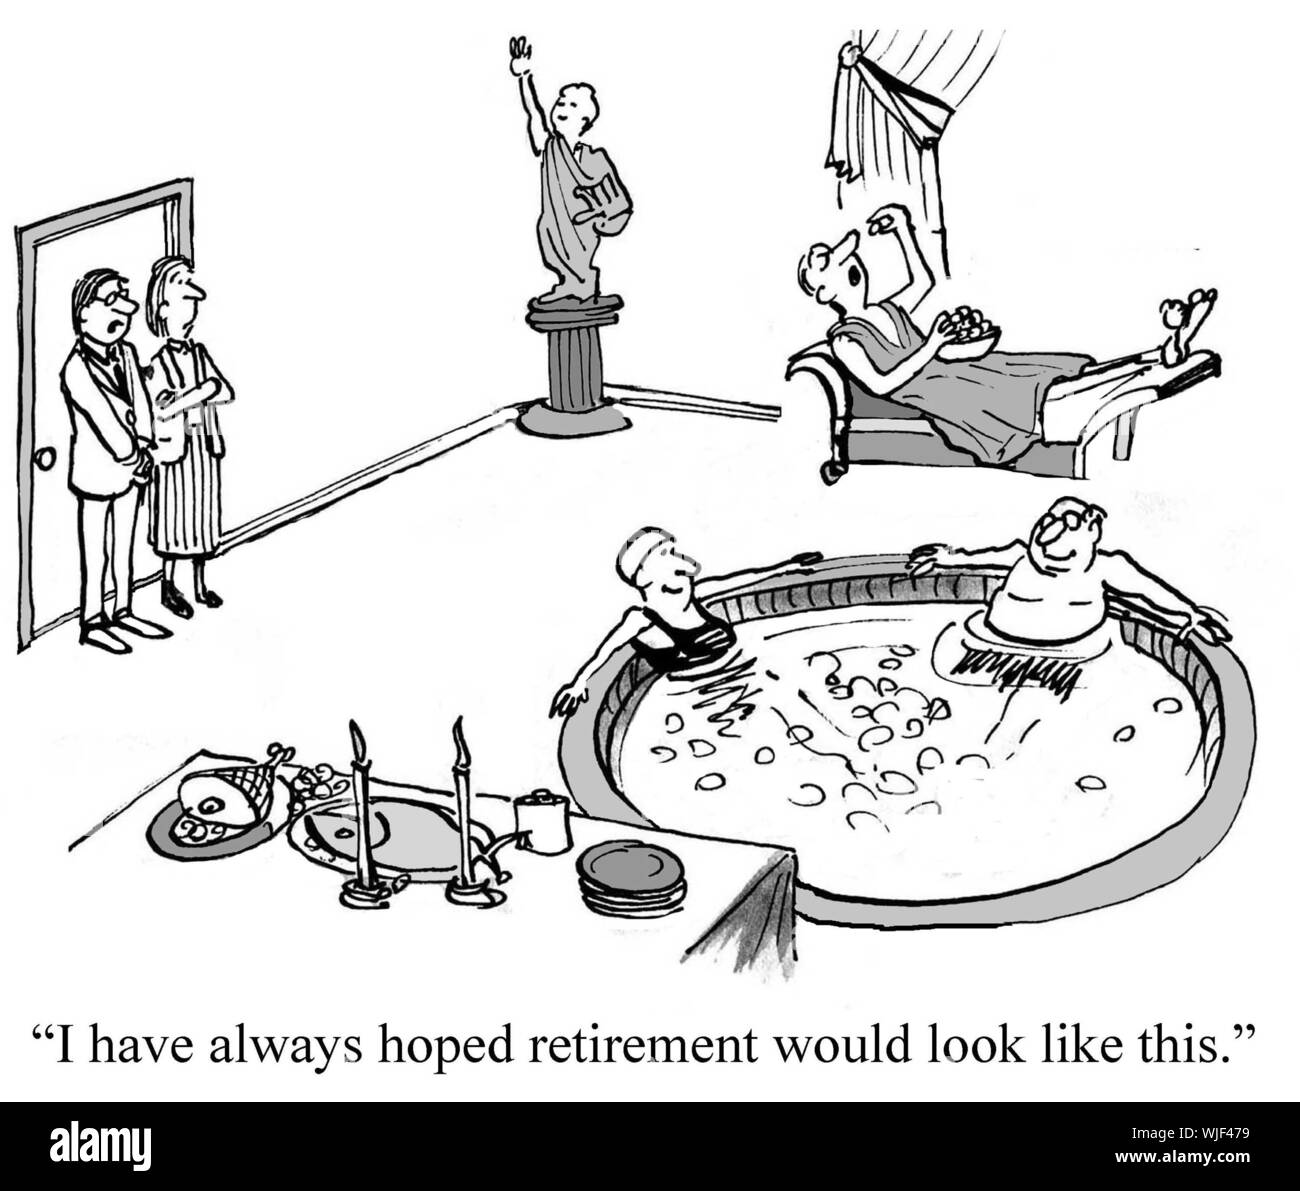 'I have always hoped retirement would look like this.' Stock Photo